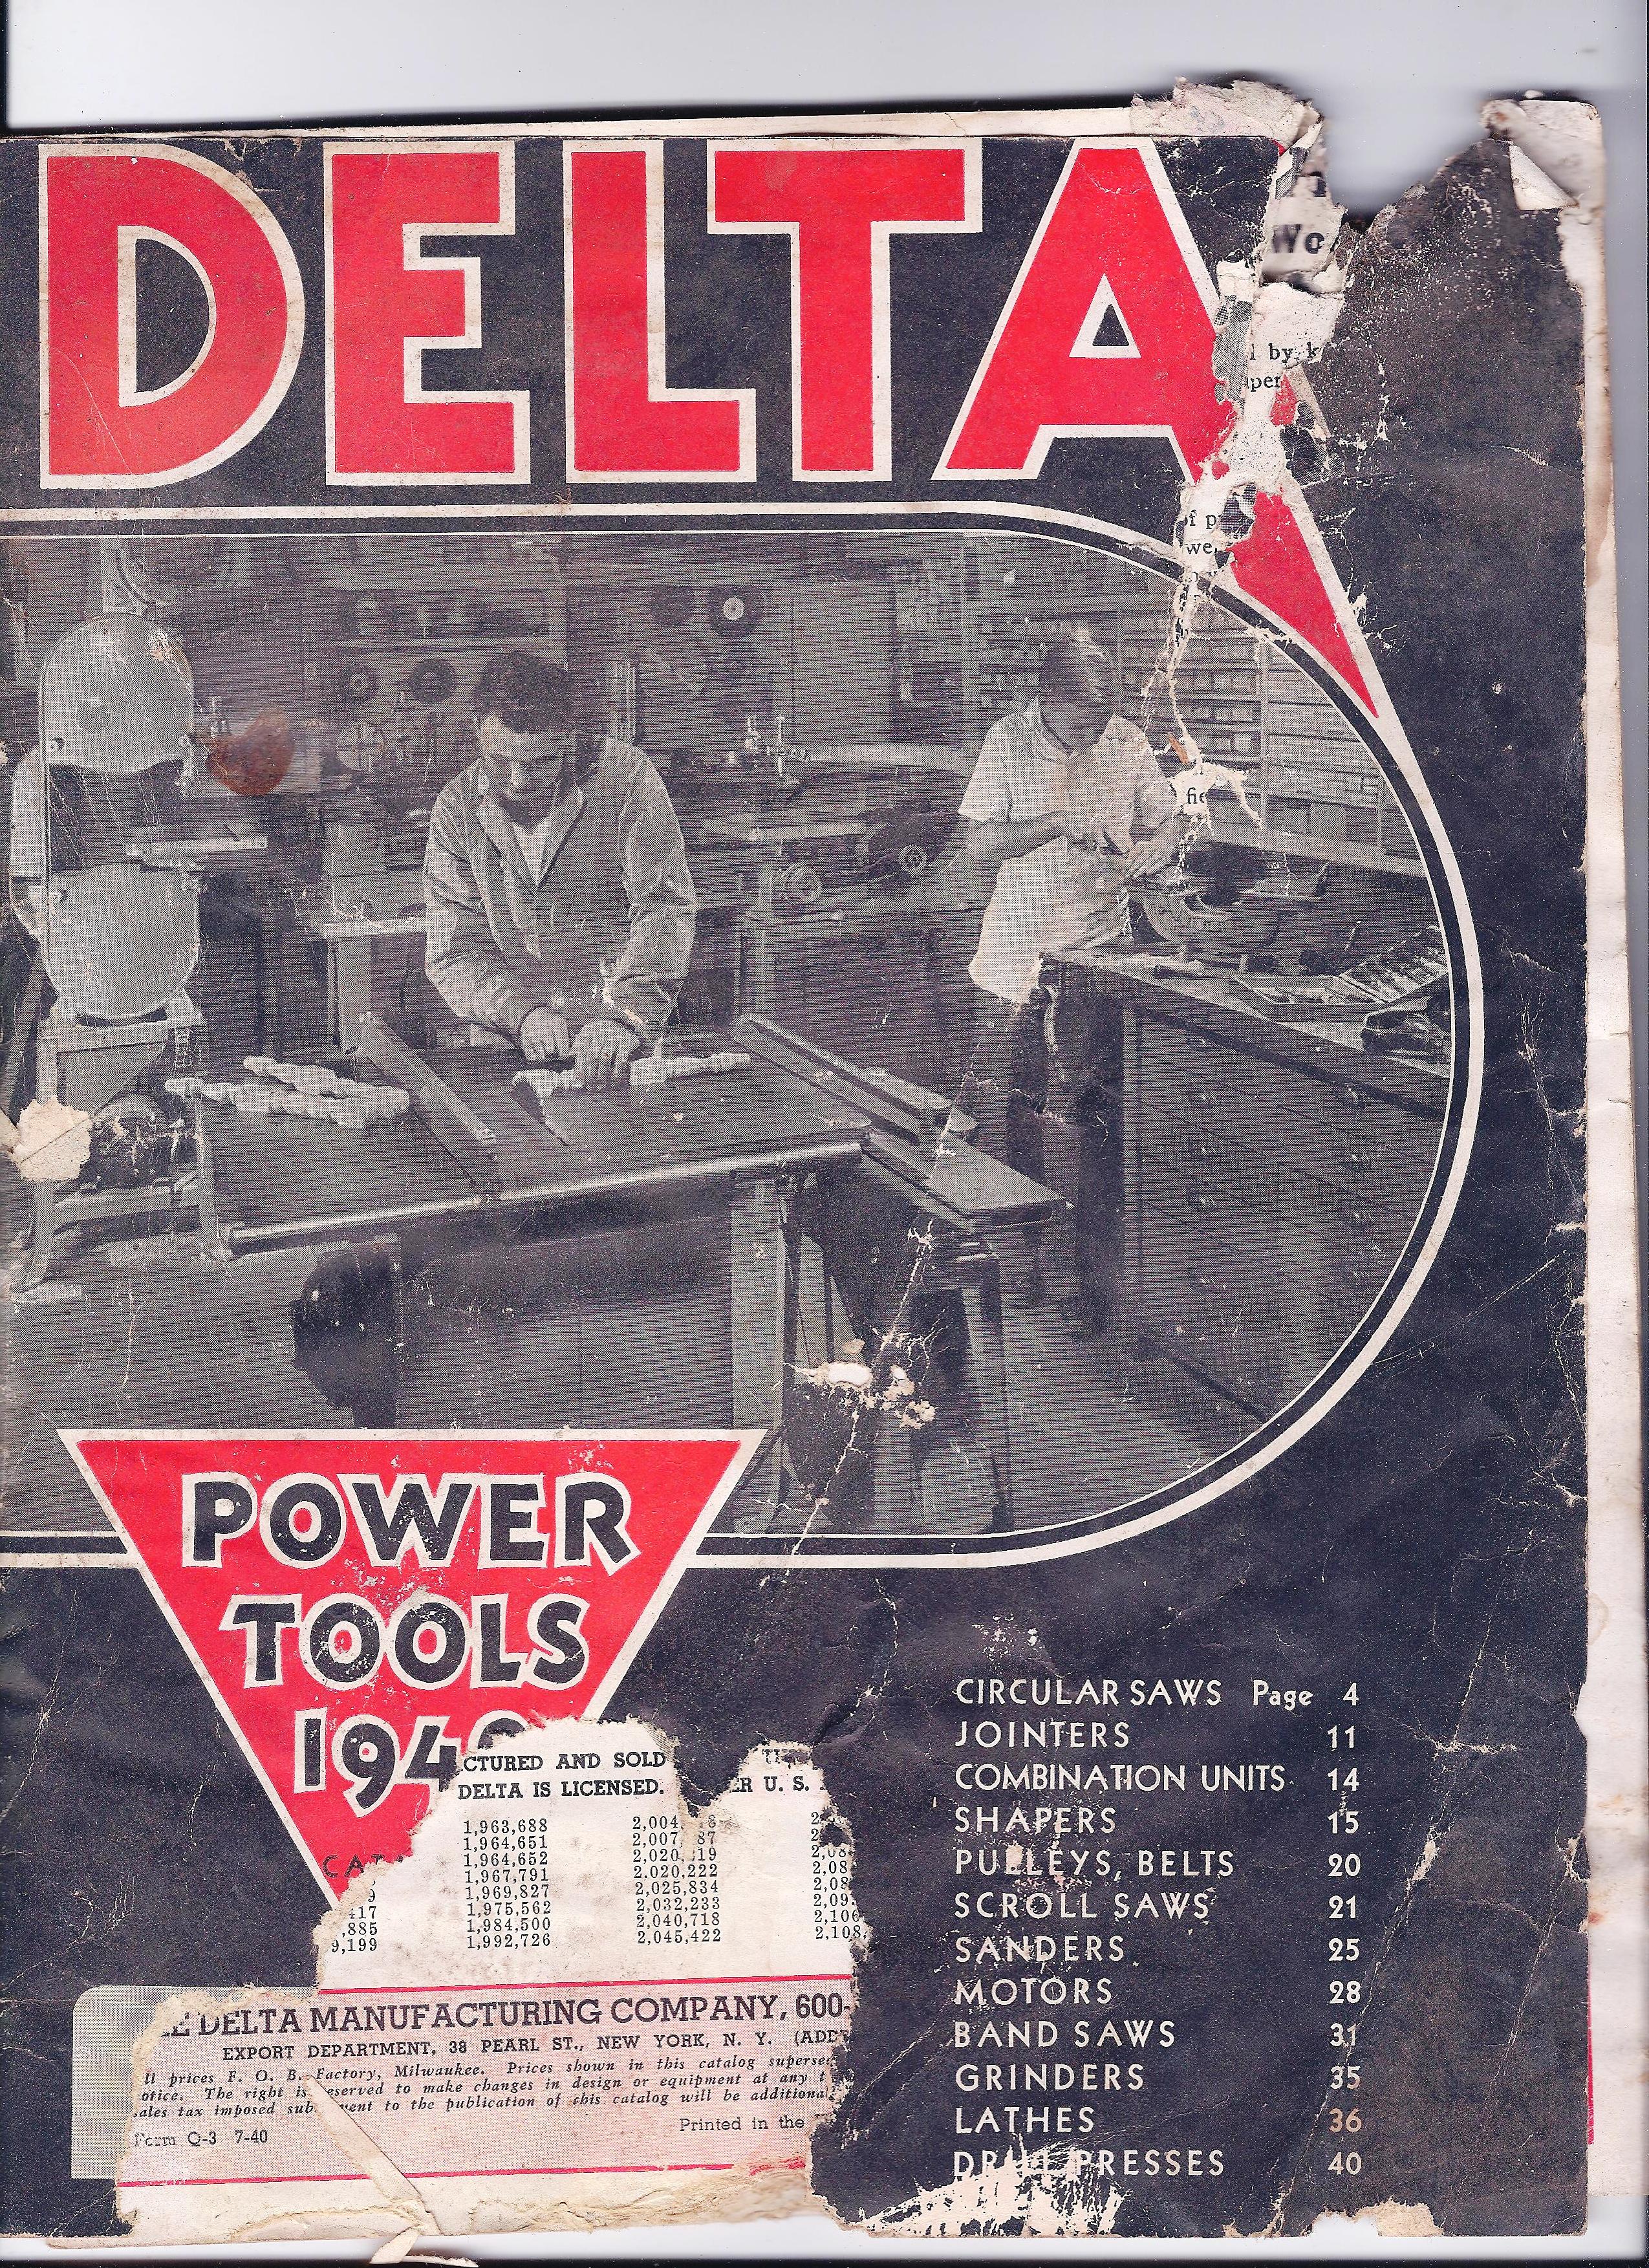 http://antiquemachinery.com/00-Delta-woodworking-1948-catalog-cover.jpeg